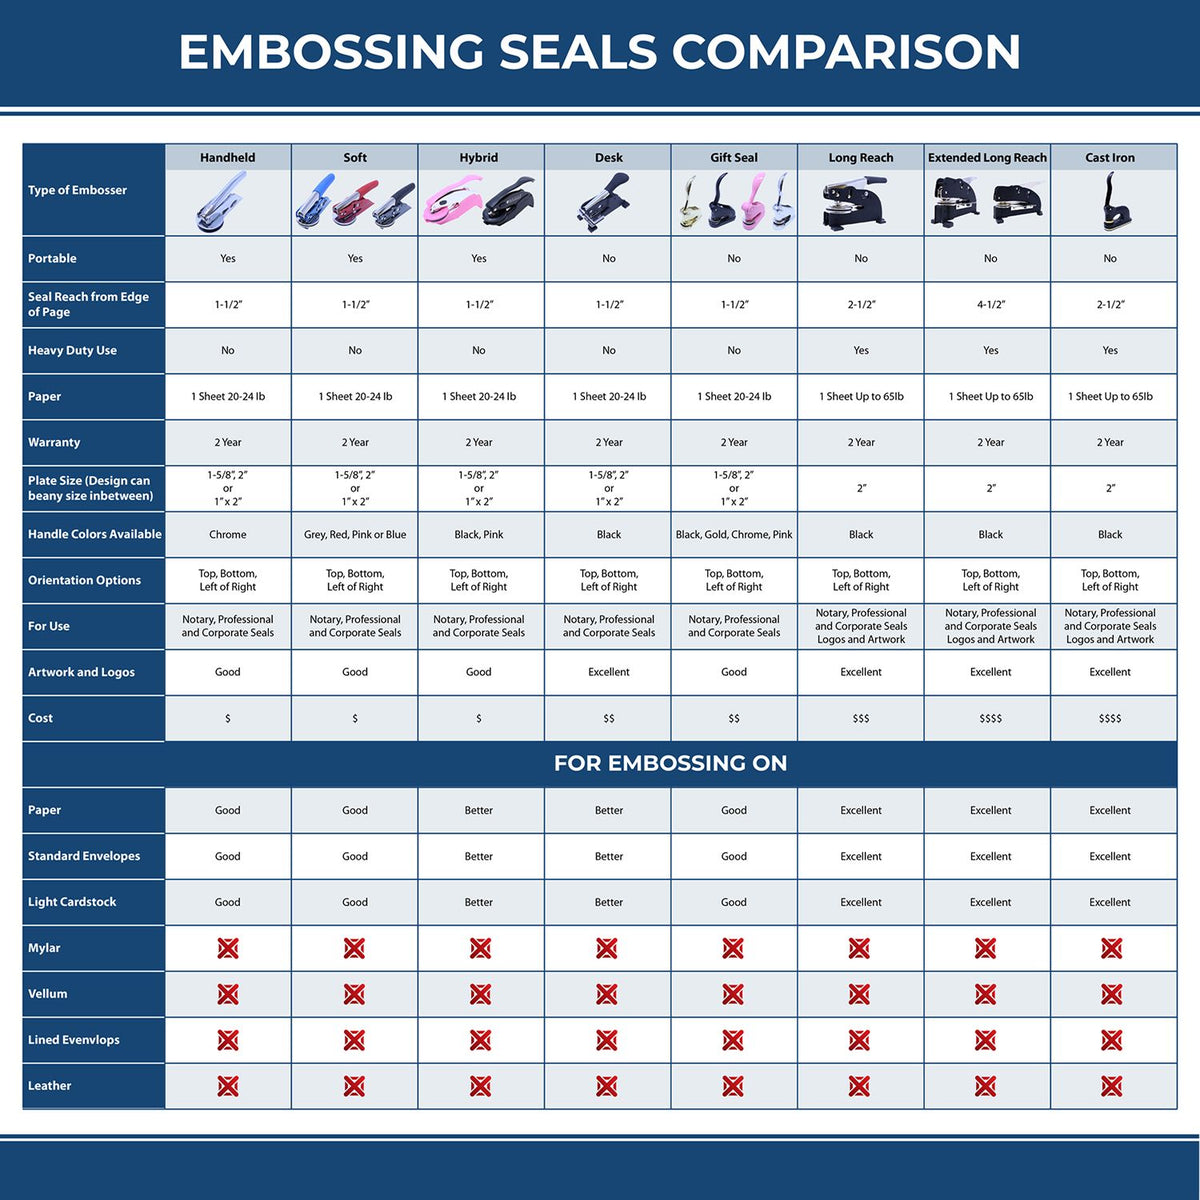 A comparison chart for the different types of mount models available for the State of Iowa Long Reach Architectural Embossing Seal.